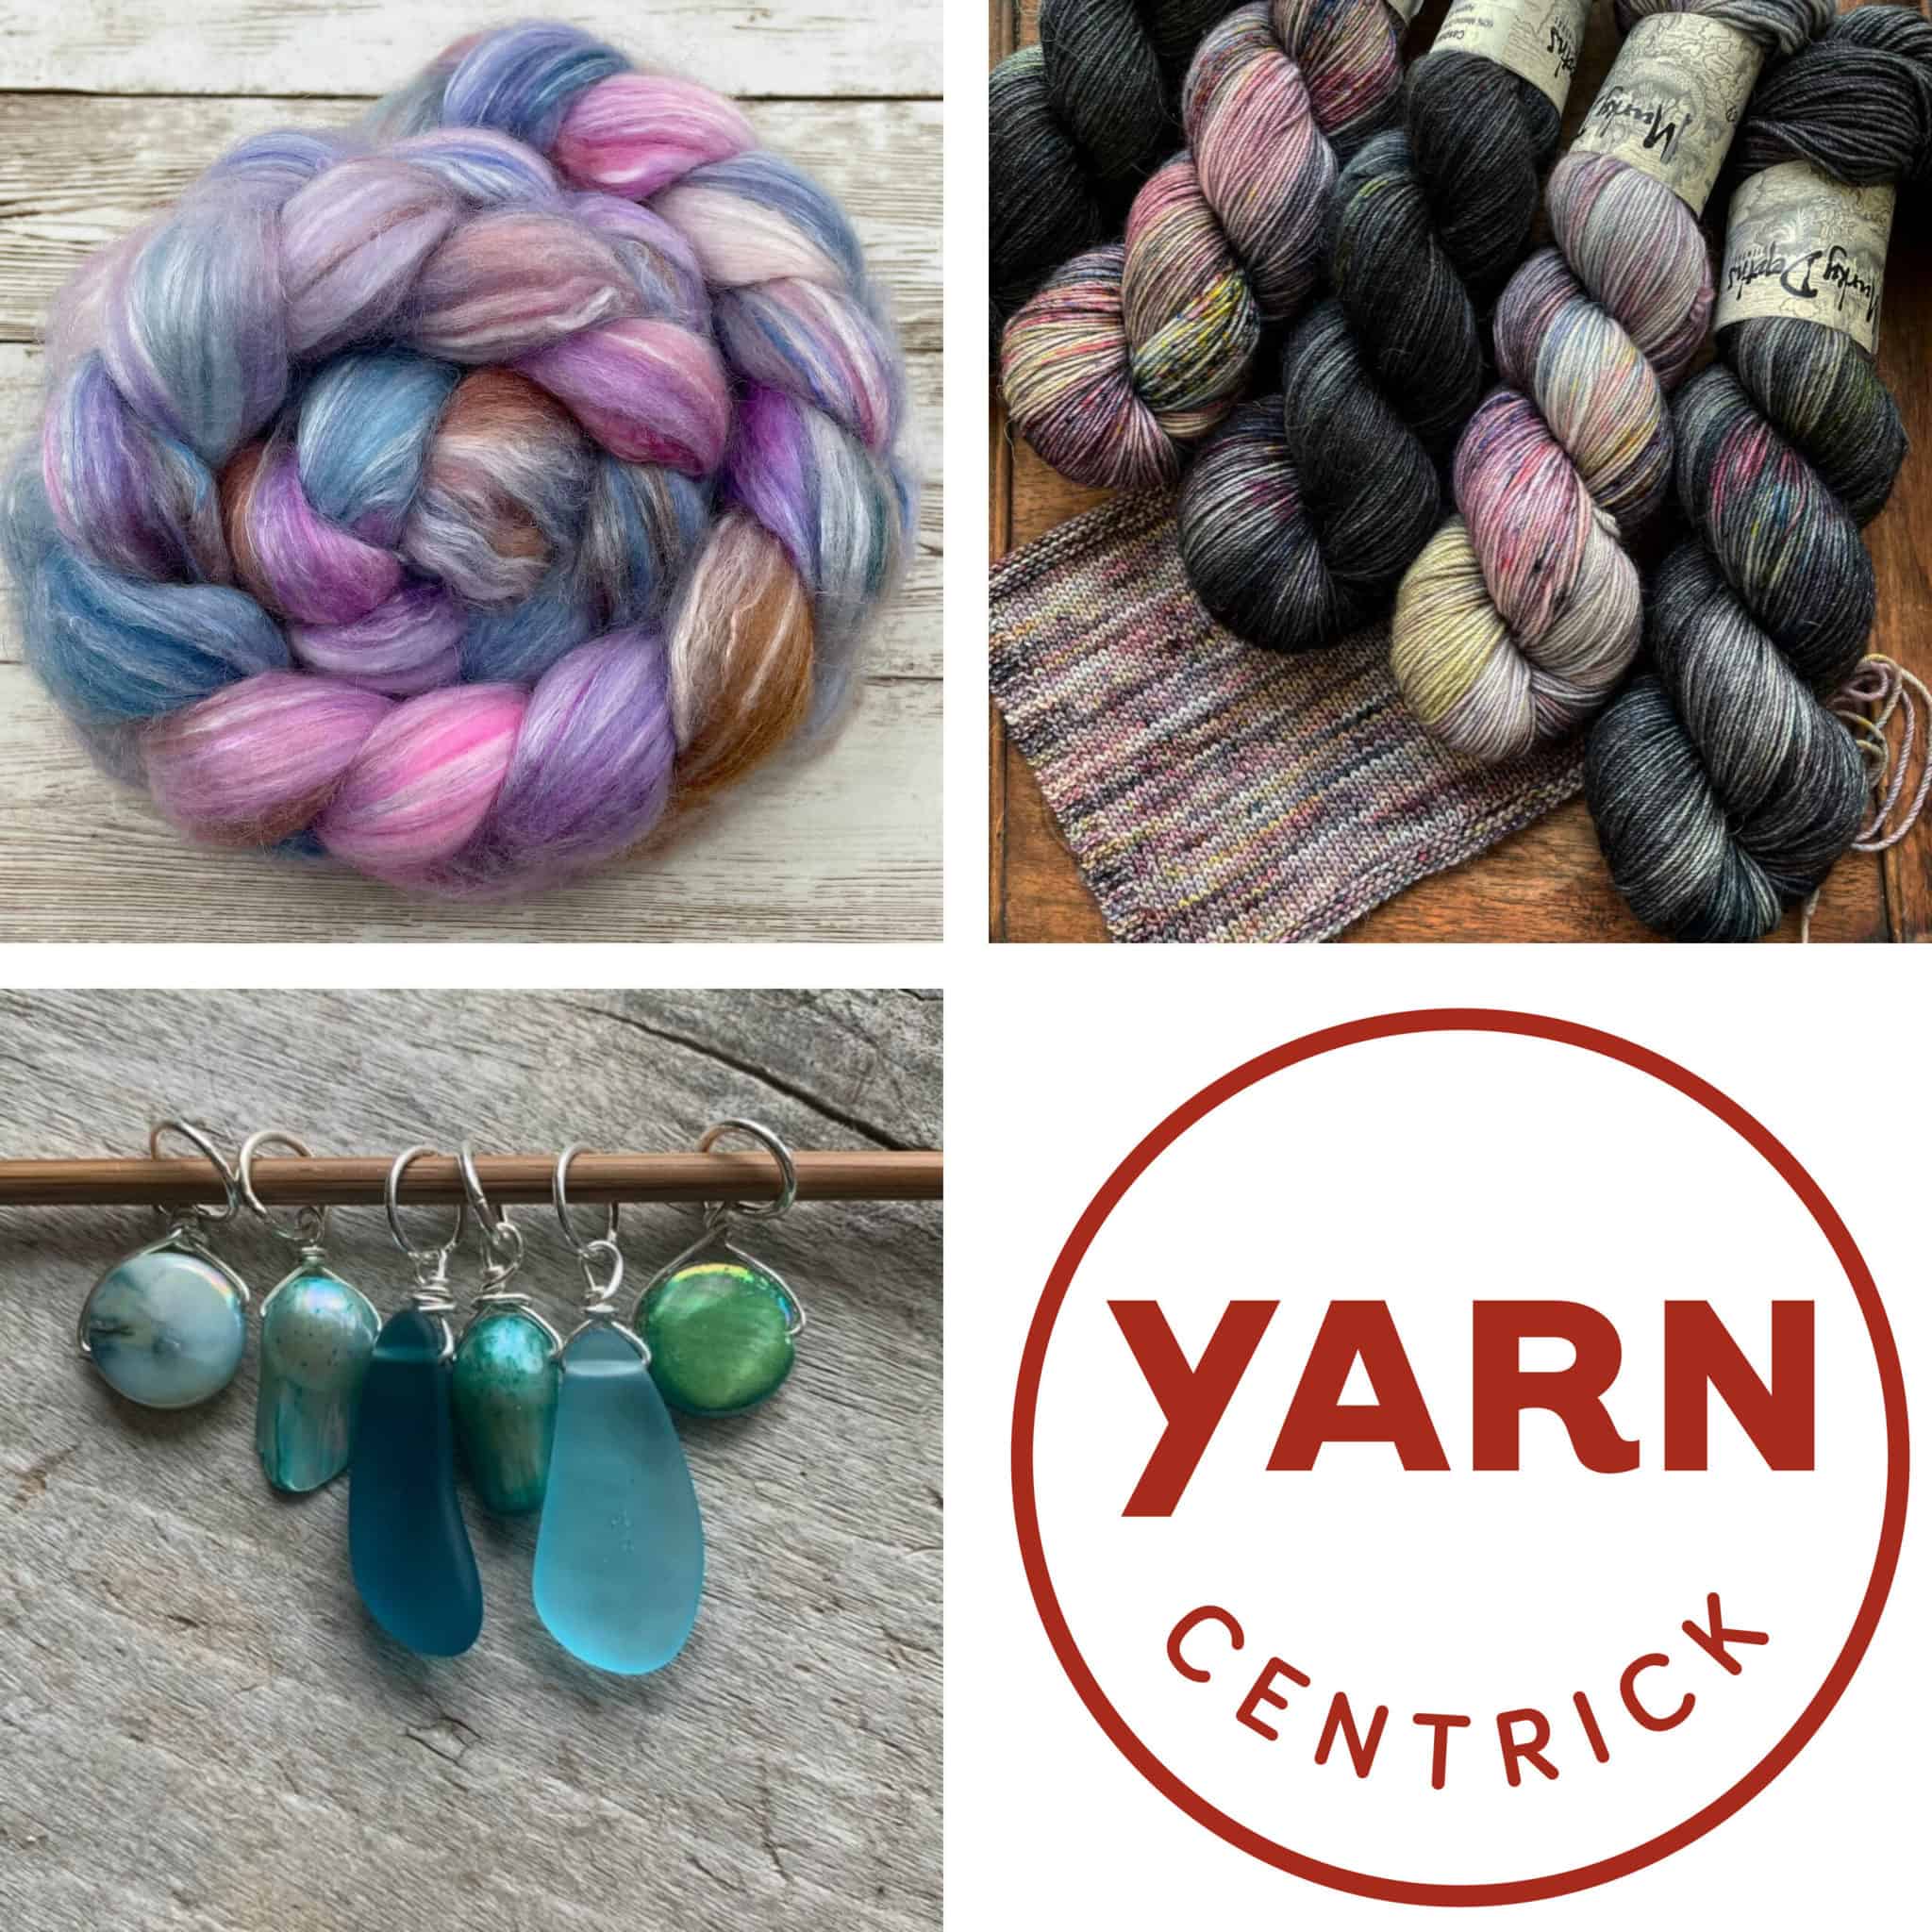 Purple and blue fiber, pink, black and gray yarn, blue and green stitch markers and the Yarn Centrick logo.